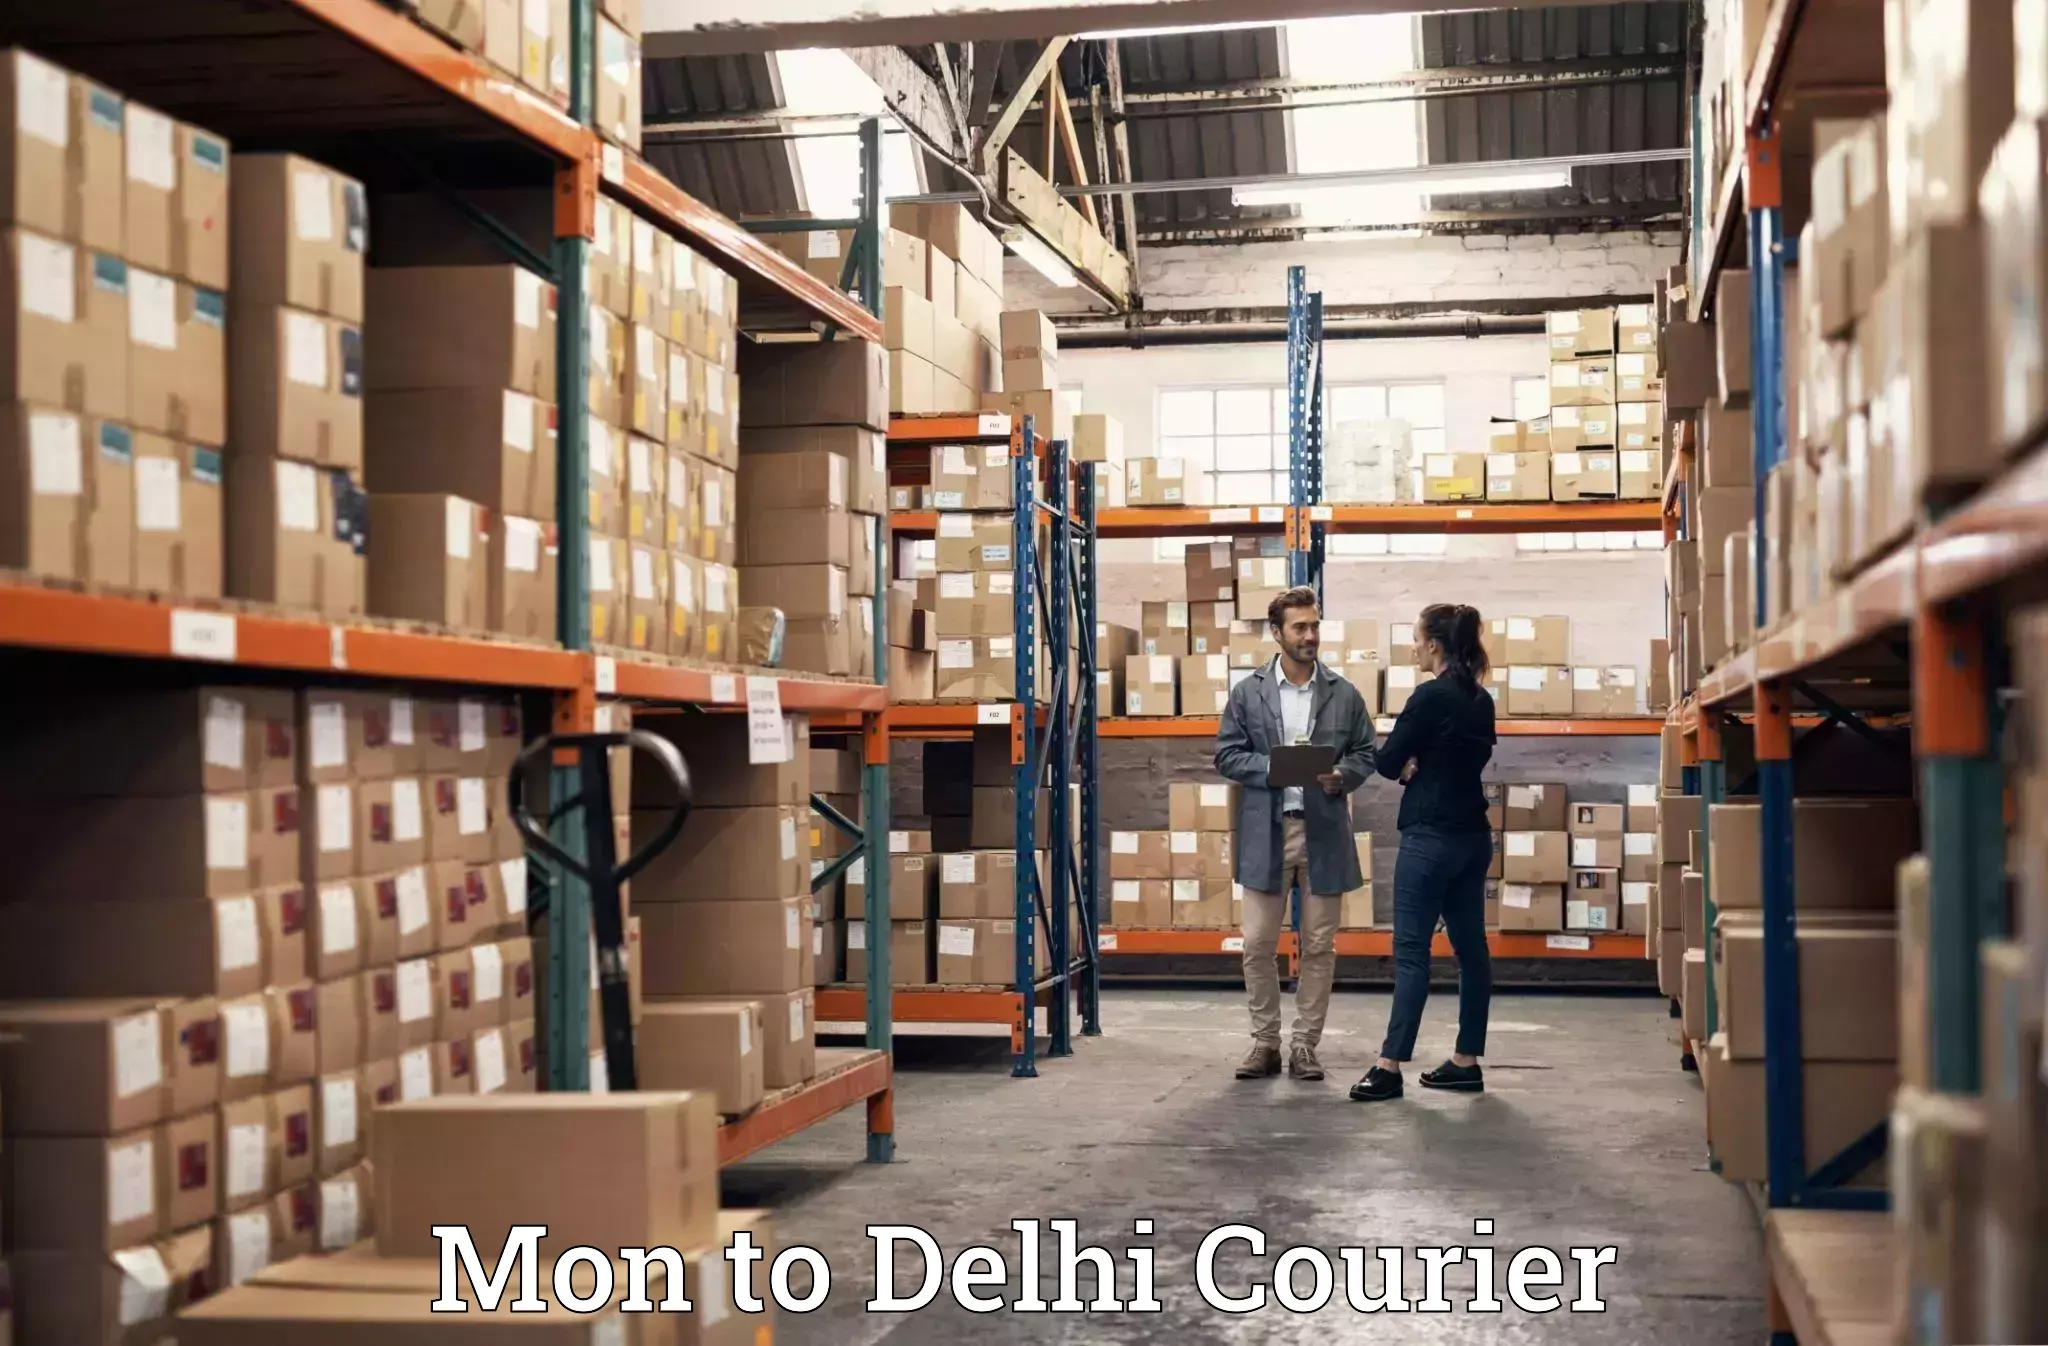 Trusted relocation experts Mon to Delhi